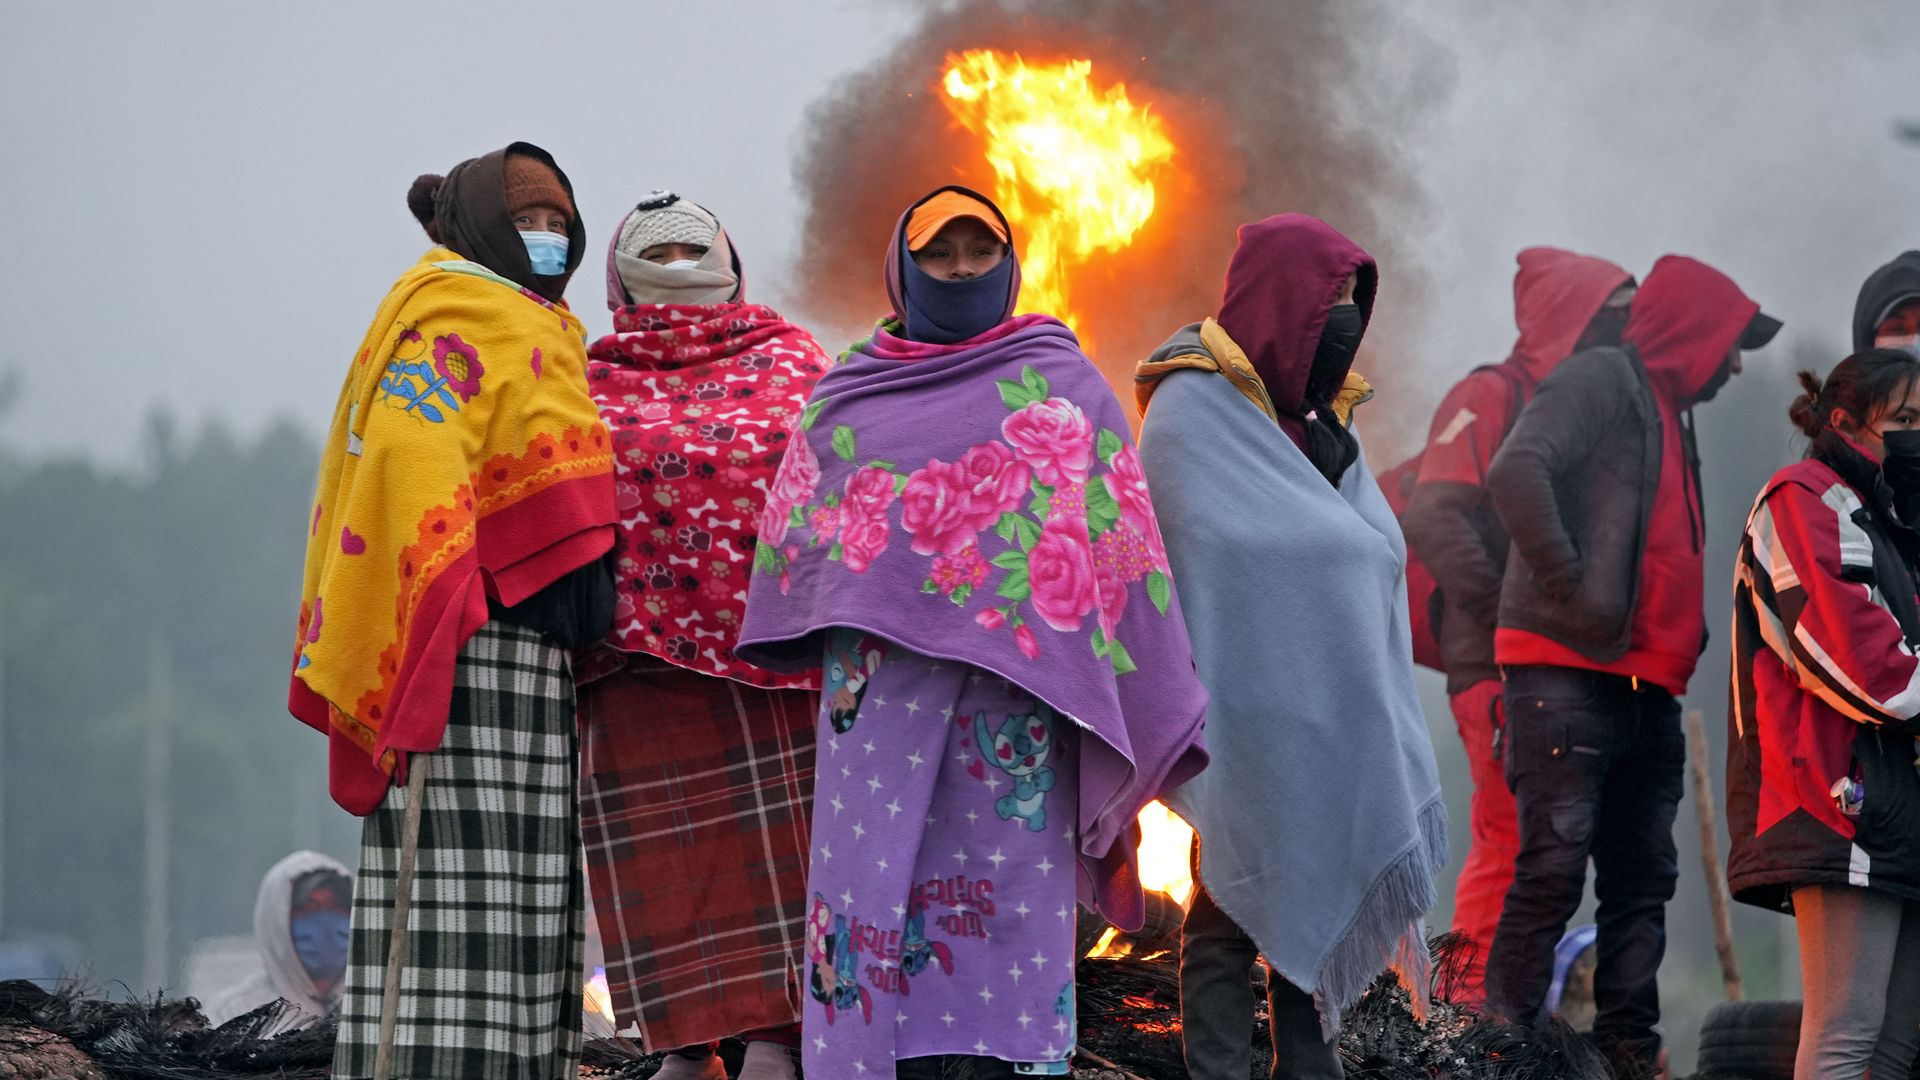 A group of women covered in blankets, masks and hoods stand in front of a large blaze during protest in Peru 